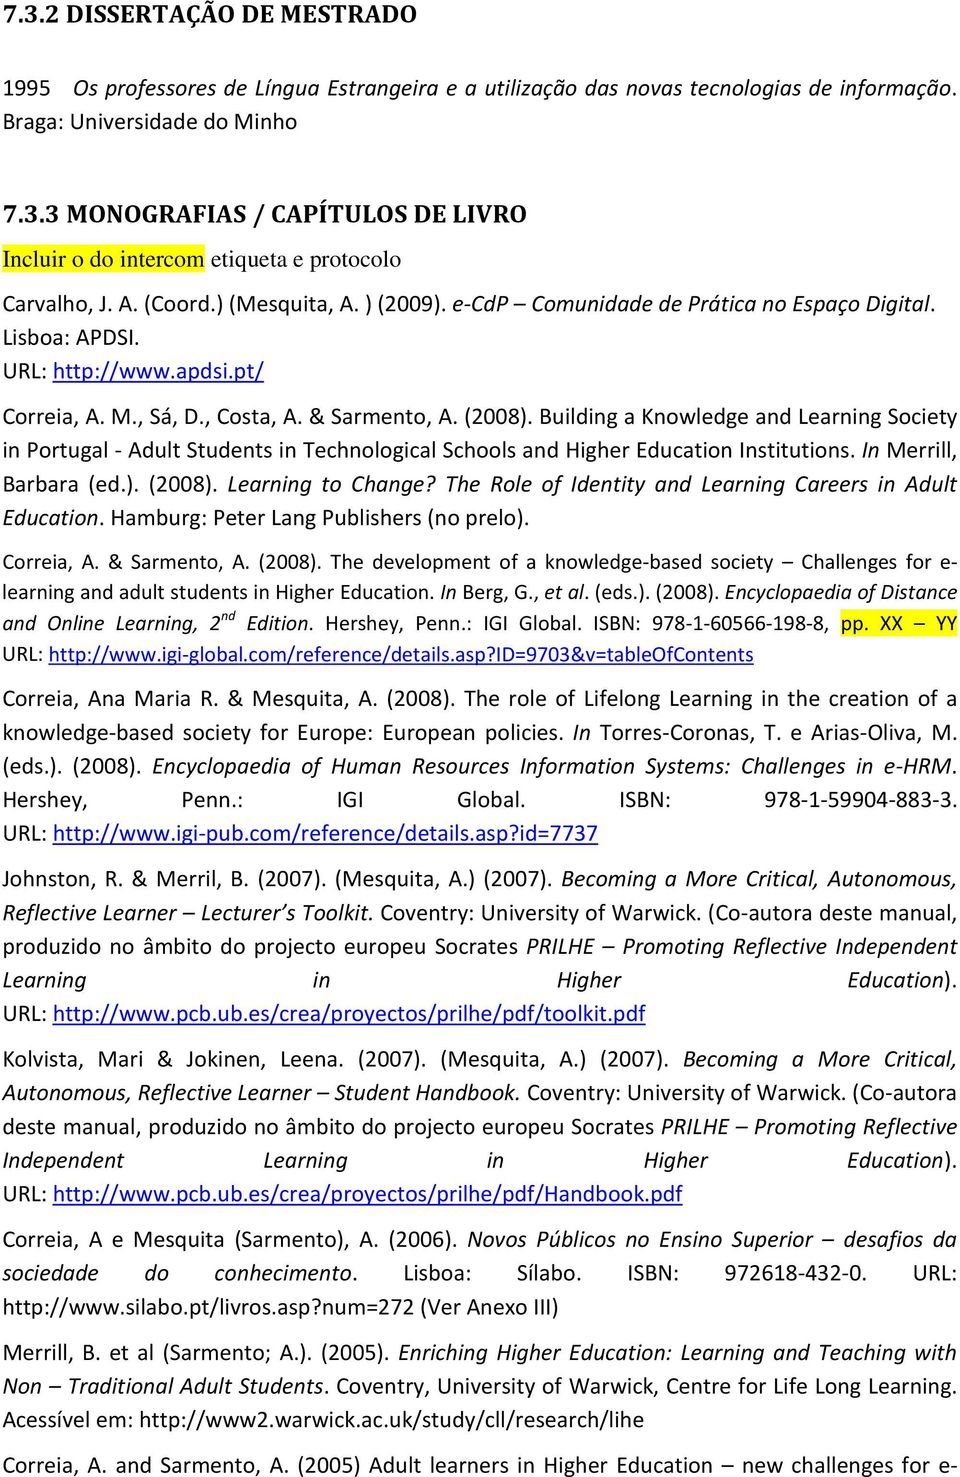 Building a Knowledge and Learning Society in Portugal - Adult Students in Technological Schools and Higher Education Institutions. In Merrill, Barbara (ed.). (2008). Learning to Change?